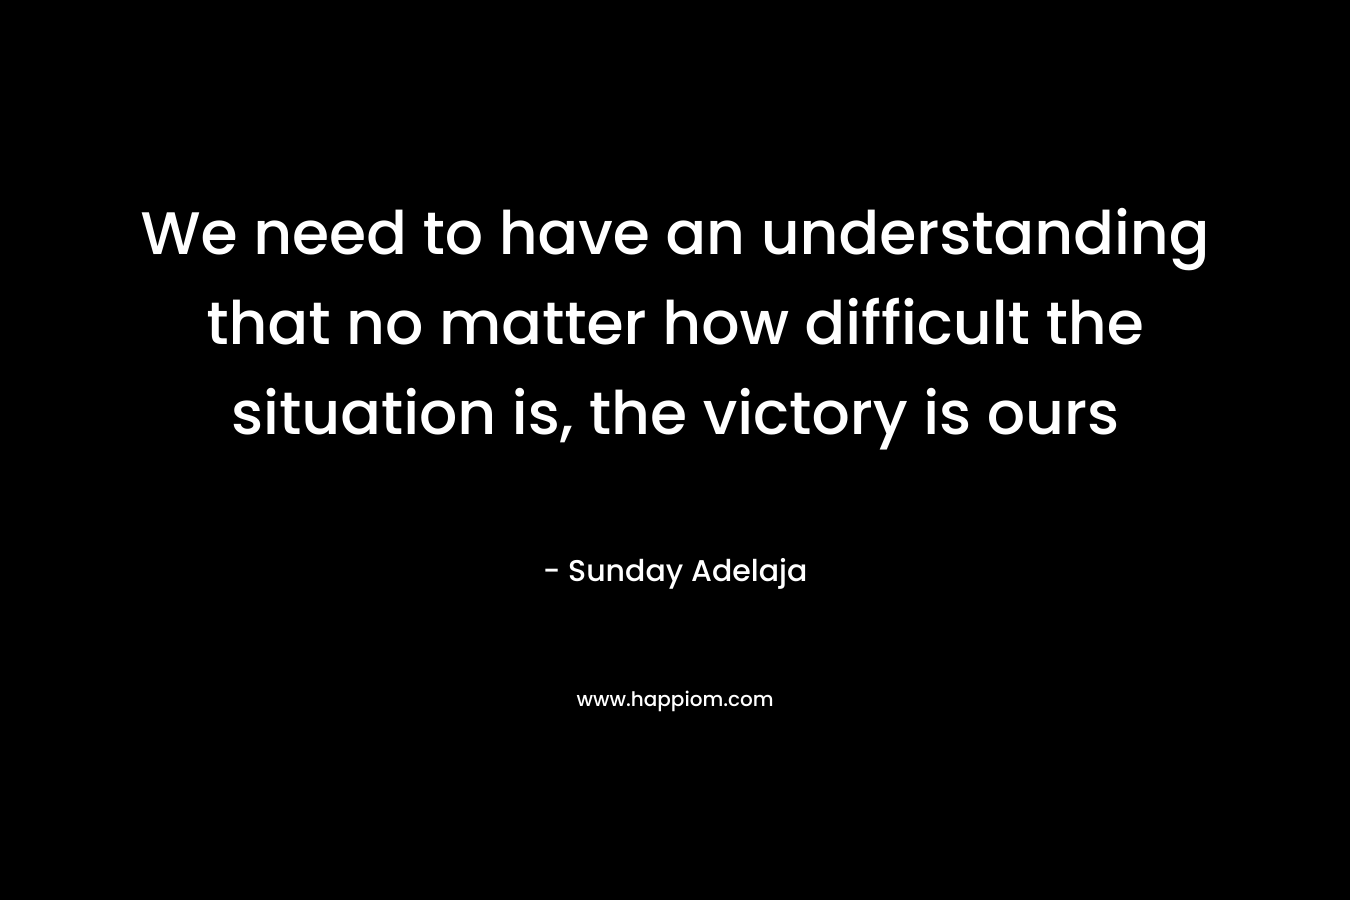 We need to have an understanding that no matter how difficult the situation is, the victory is ours